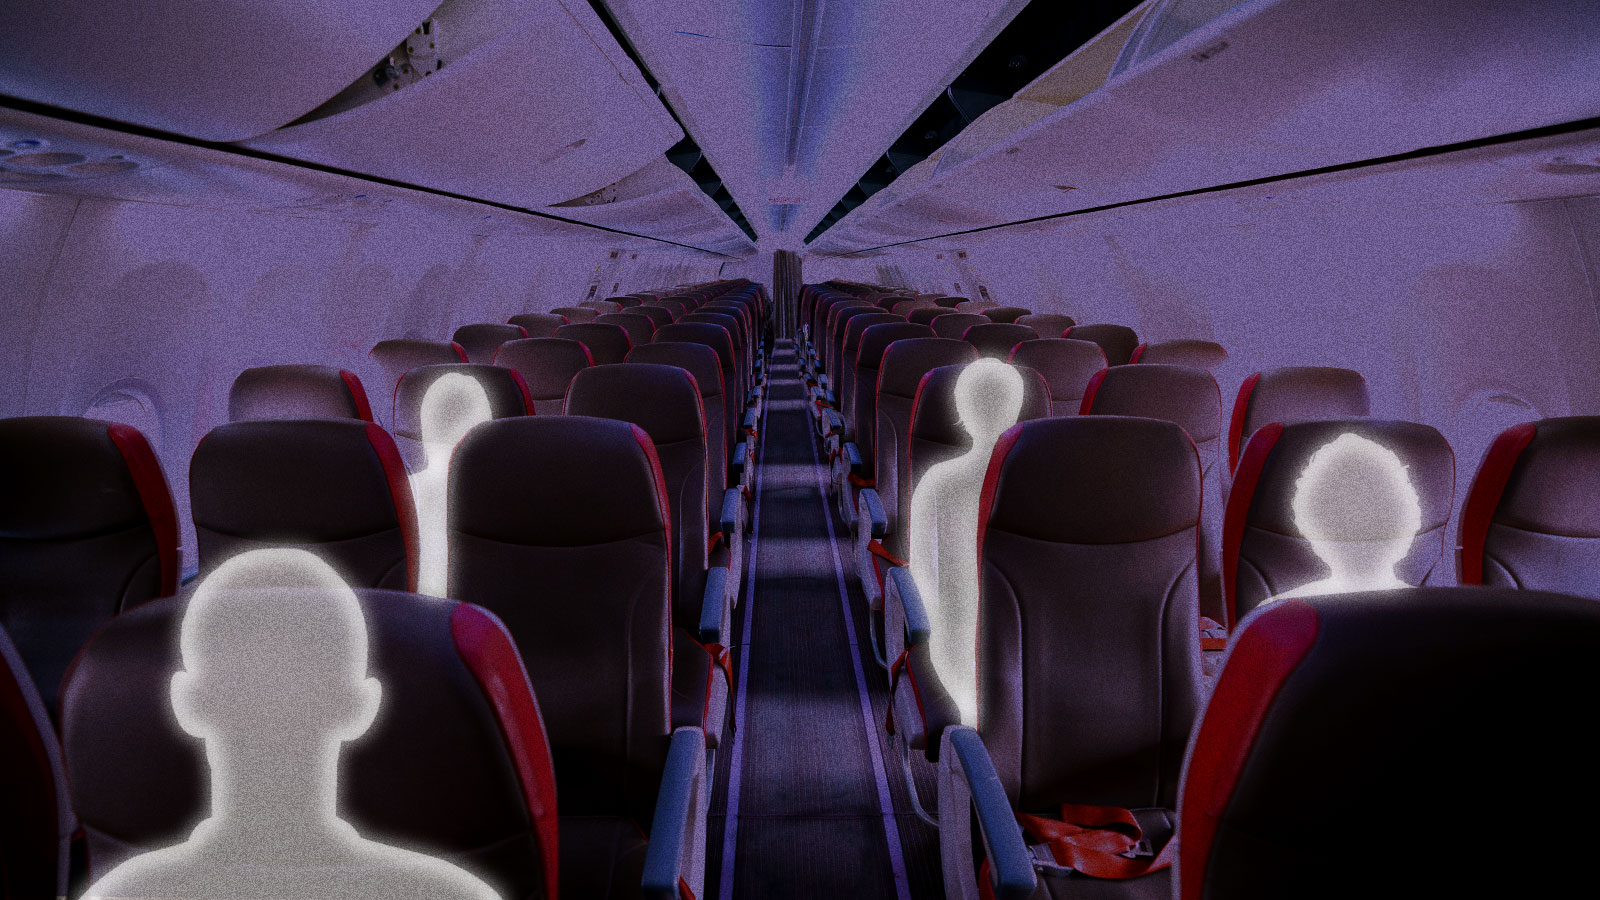 Thousands of Planes Are Flying Empty and No One Can Stop Them